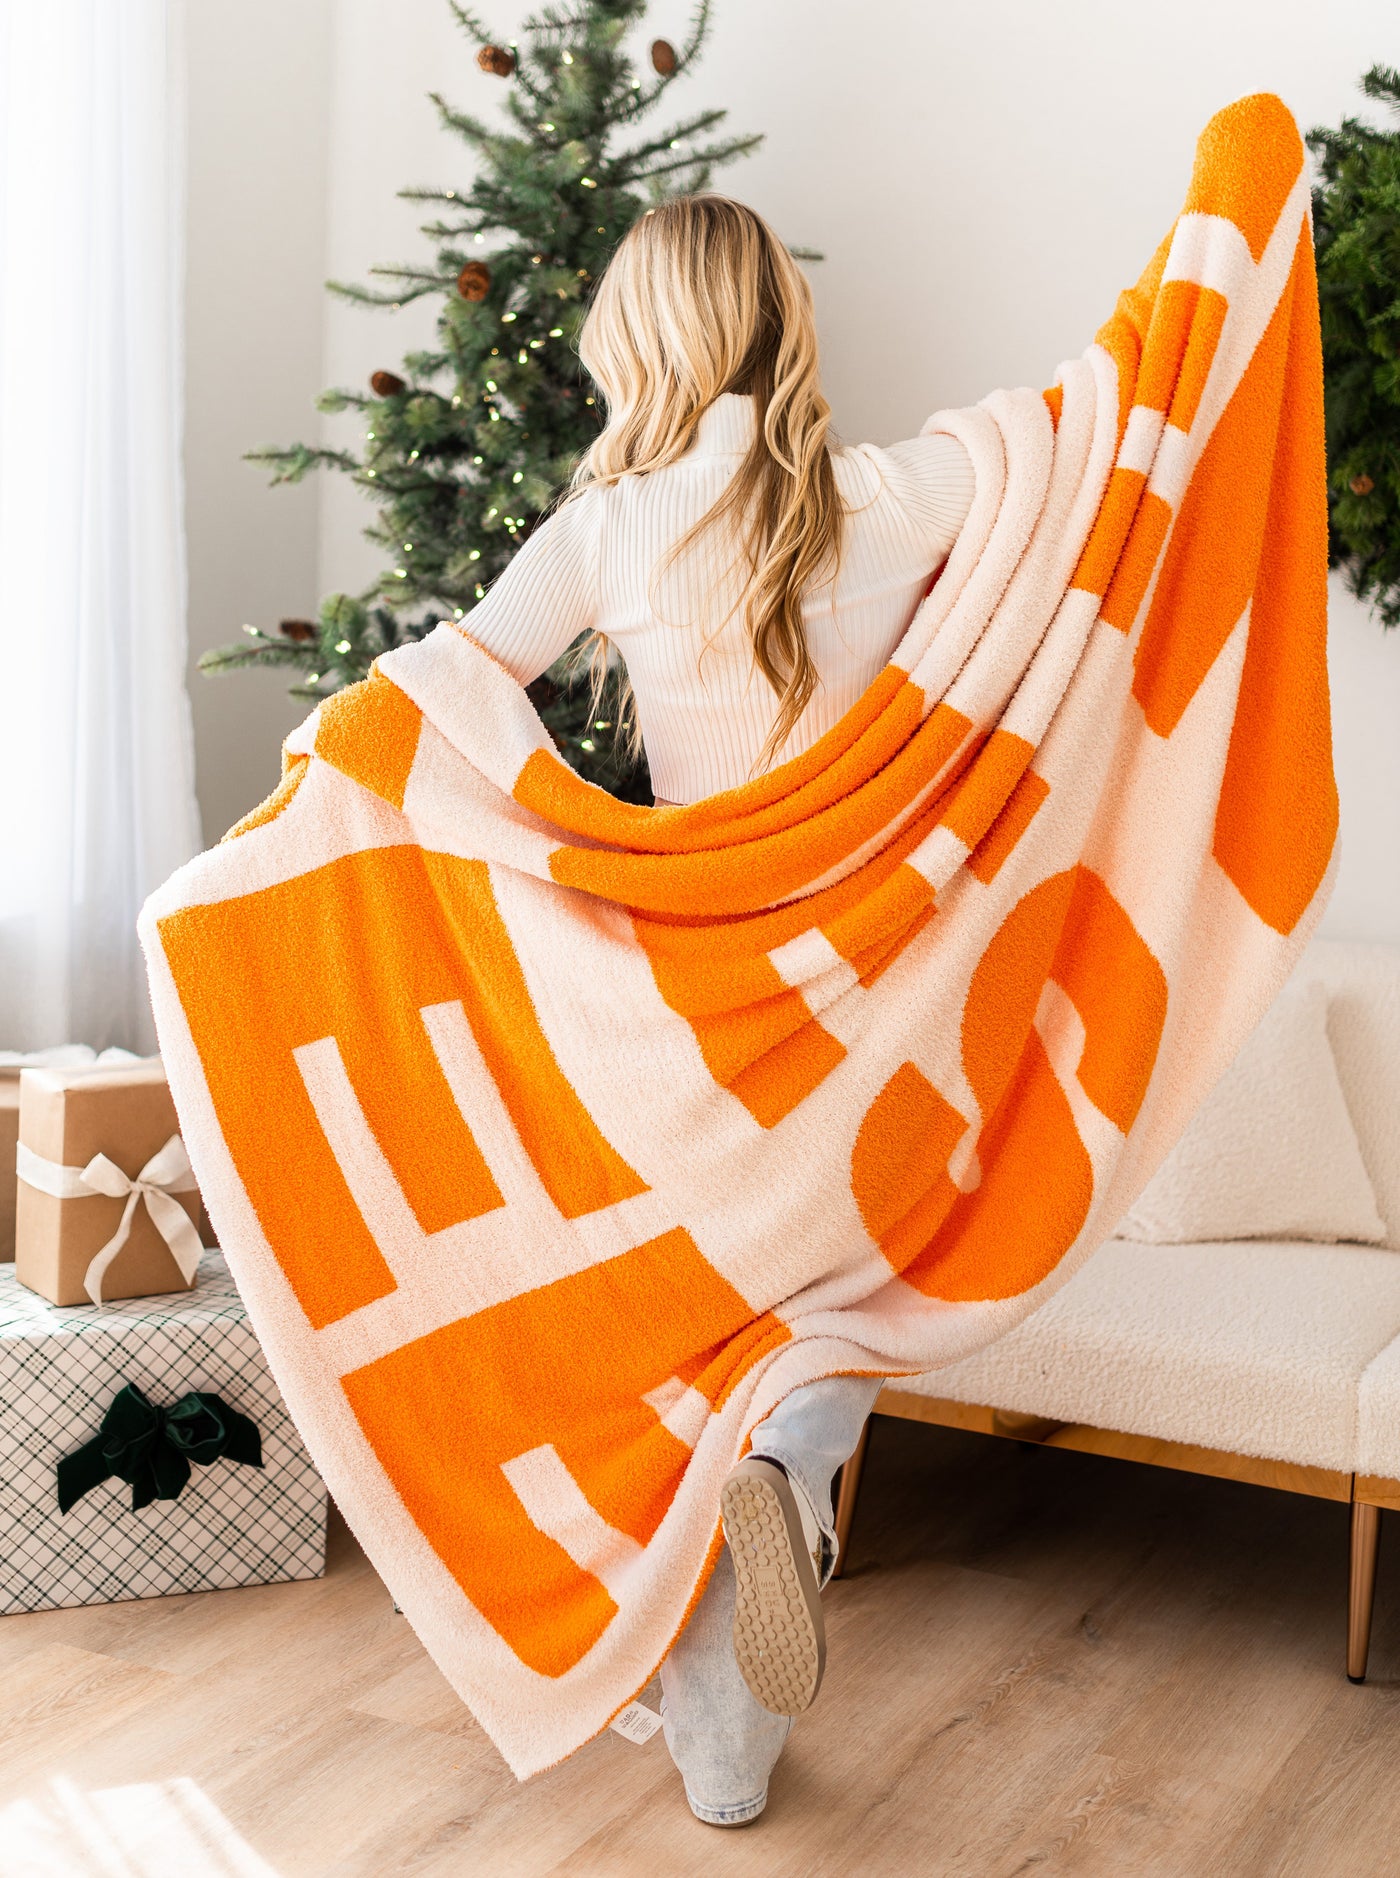 Cozy Up with These Hometown USA® Blankets